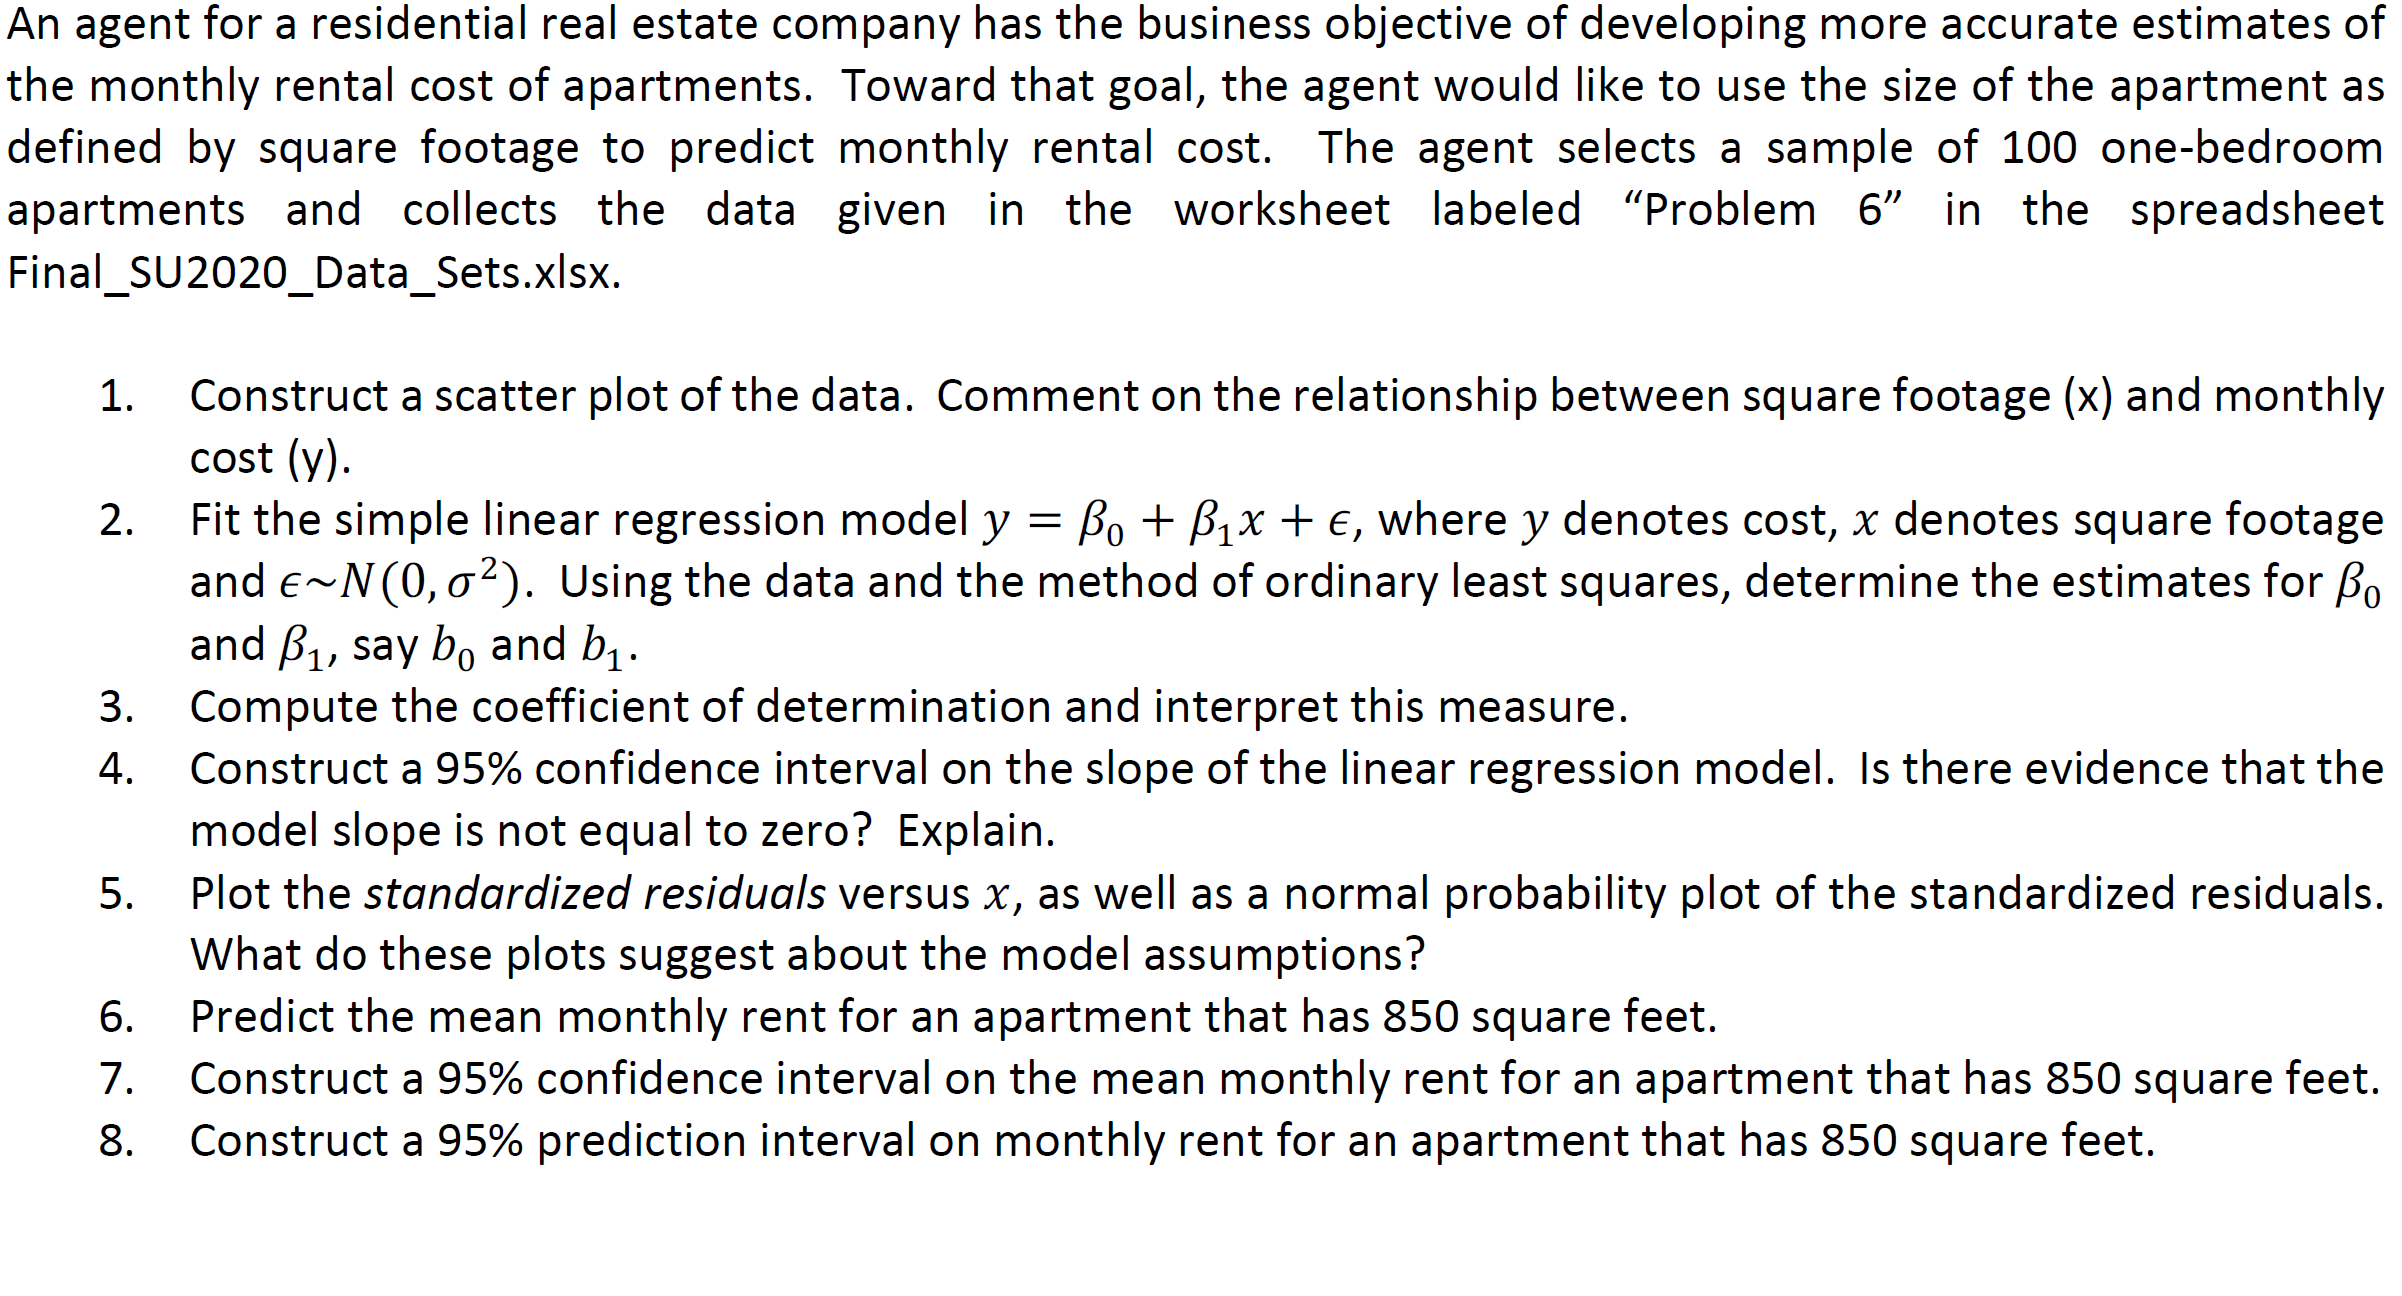 An agent for a residential real estate company has the business objective of developing more accurate estimates of
the monthly rental cost of apartments. Toward that goal, the agent would like to use the size of the apartment as
defined by square footage to predict monthly rental cost. The agent selects a sample of 100 one-bedroom
apartments and collects the data given in the worksheet labeled "Problem 6" in the spreadsheet
Final_SU2020_Data_Sets.xlsx.
Construct a scatter plot of the data. Comment on the relationship between square footage (x) and monthly
cost (y).
Fit the simple linear regression model y = Bo + B1x + €, where y denotes cost, x denotes square footage
and e~N(0, 02). Using the data and the method of ordinary least squares, determine the estimates for Bo
and B1, say bo and b .
Compute the coefficient of determination and interpret this measure.
Construct a 95% confidence interval on the slope of the linear regression model. Is there evidence that the
model slope is not equal to zero? Explain.
Plot the standardized residuals versus x, as well as a normal probability plot of the standardized residuals.
What do these plots suggest about the model assumptions?
Predict the mean monthly rent for an apartment that has 850 square feet.
7.
1.
2.
3.
4.
6.
Construct a 95% confidence interval on the mean monthly rent for an apartment that has 850 square feet.
8.
Construct a 95% prediction interval on monthly rent for an apartment that has 850 square feet.
5.
